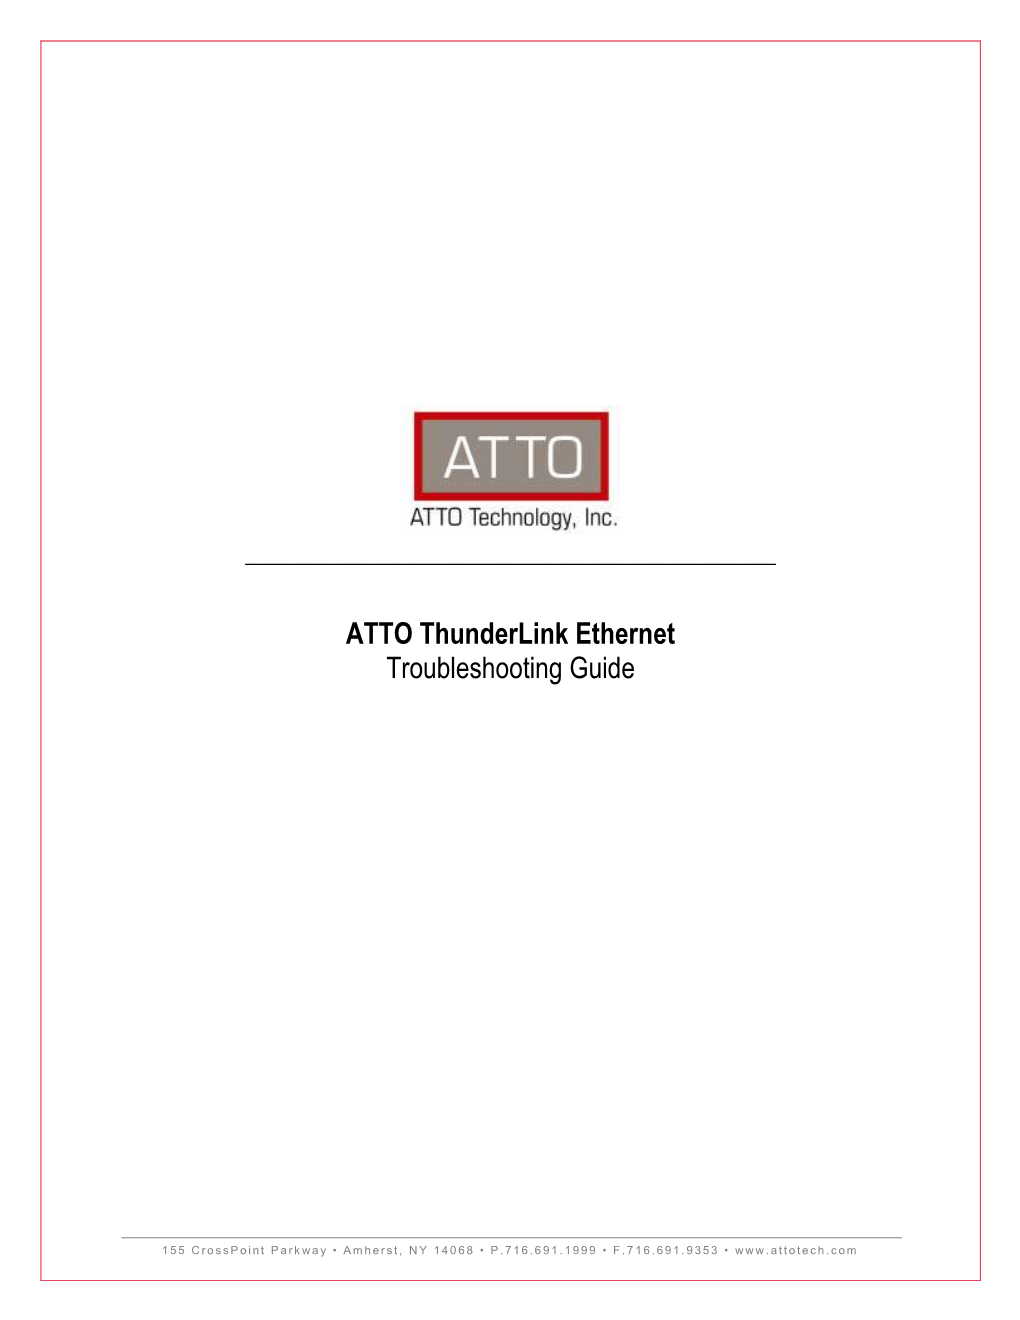 ATTO Thunderlink Ethernet Troubleshooting Guide